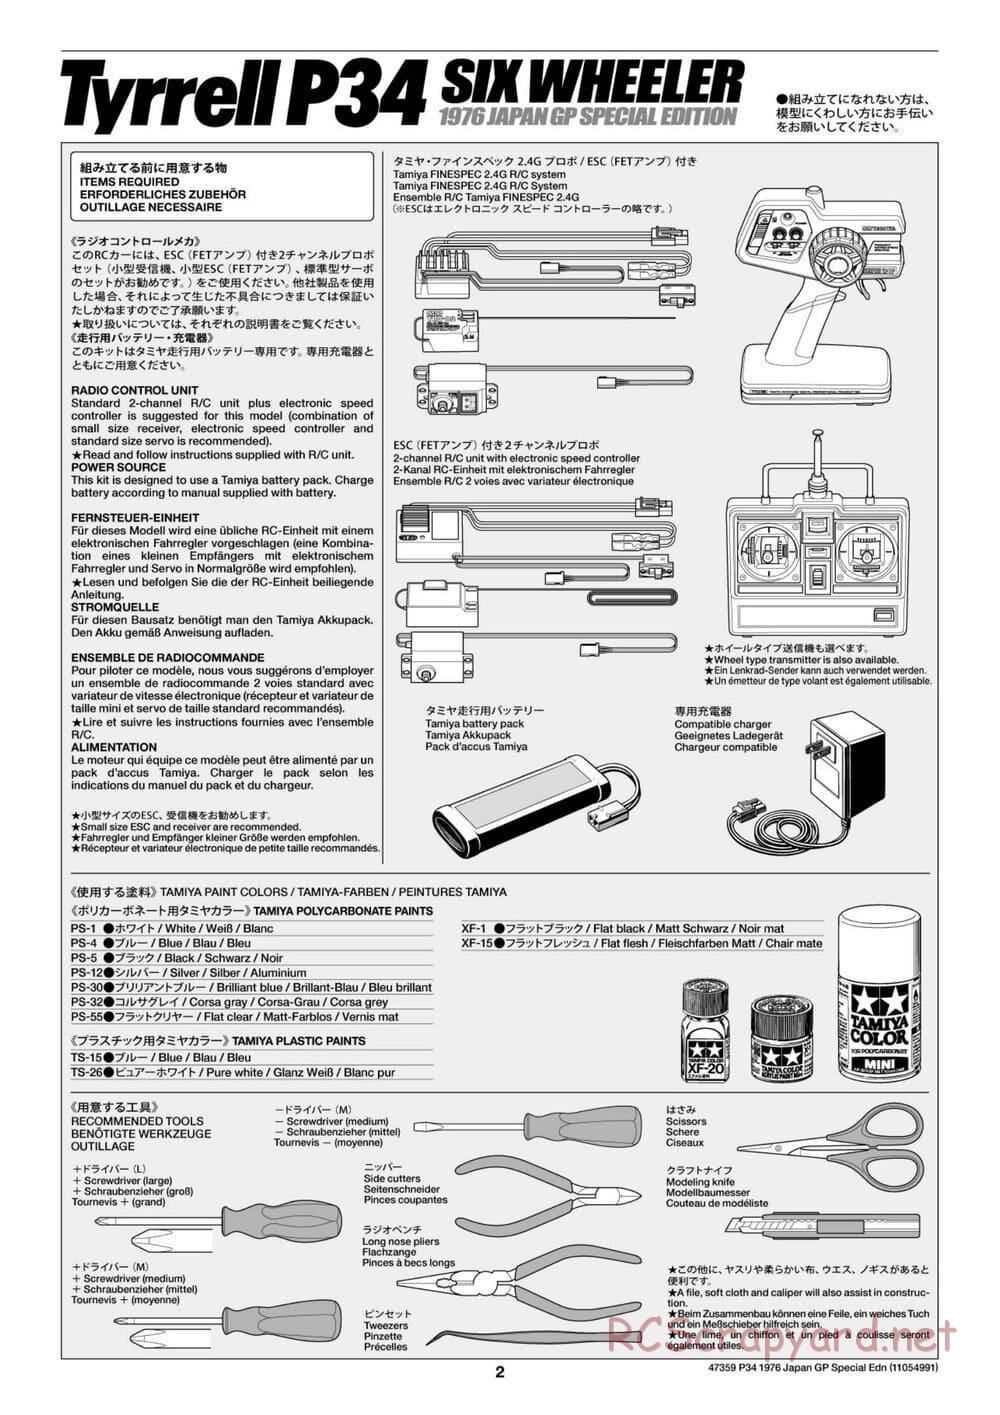 Tamiya - Tyrrell P34 1976 Japan Grand Prix Special - F103-6W Chassis - Manual - Page 2